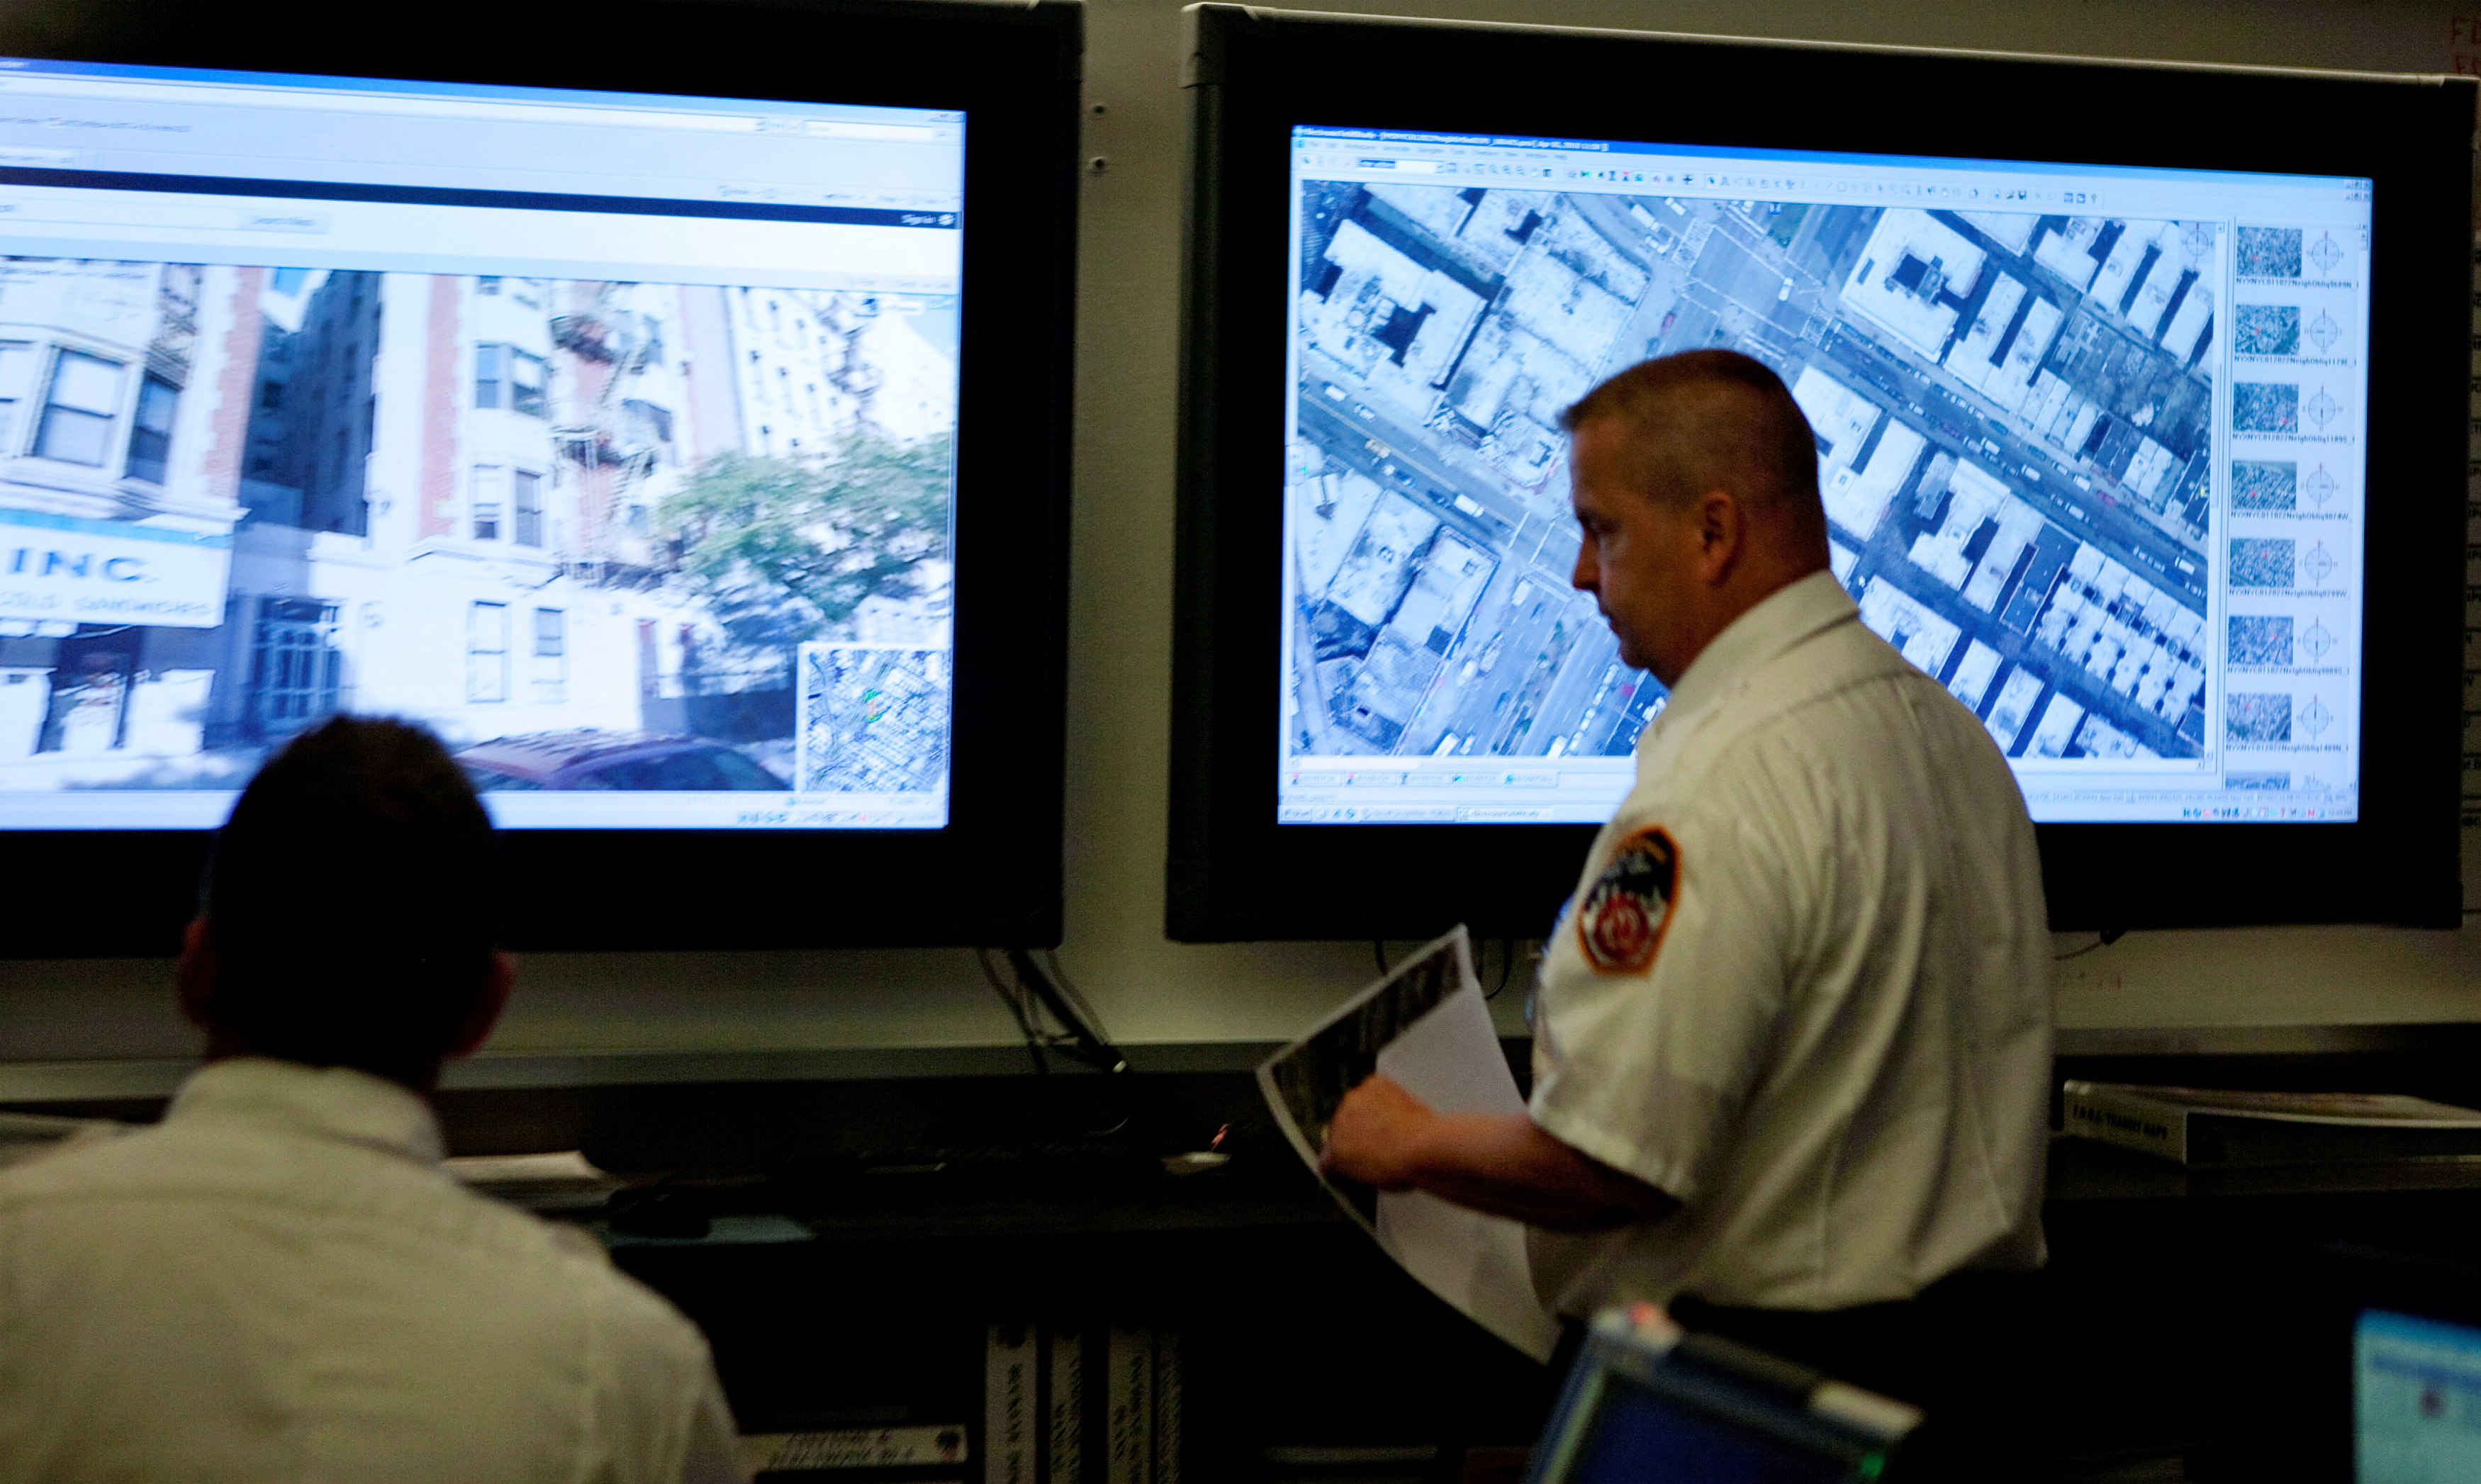 Officers from the New York Fire Department look at aerial and street imagery of a building in New York